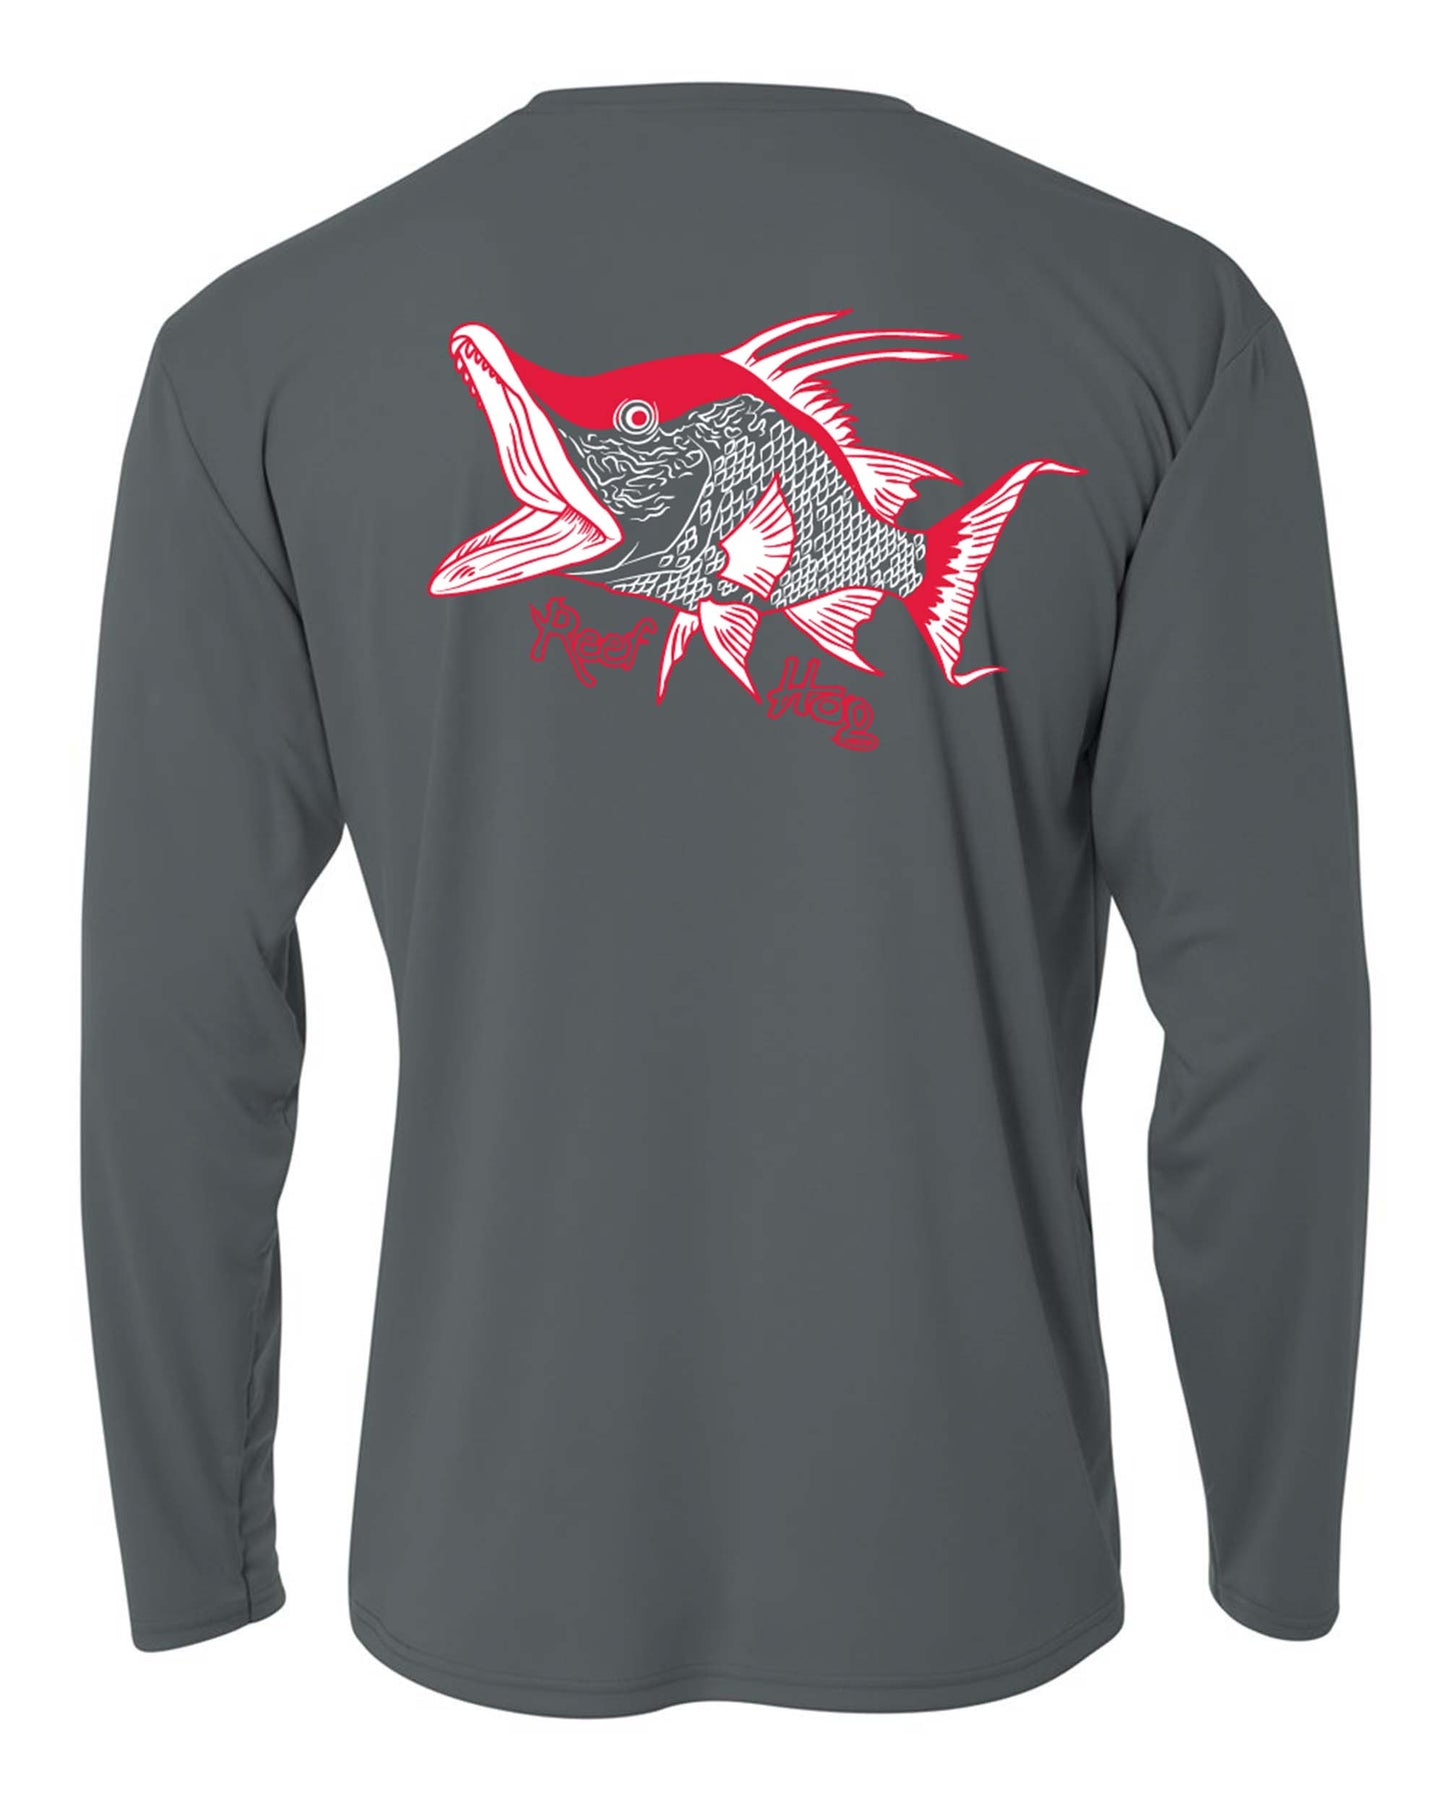 Hogfish "Reef Hog" Performance Dry-fit Long Sleeve Charcoal Shirt with 50+ UV Sun Protection